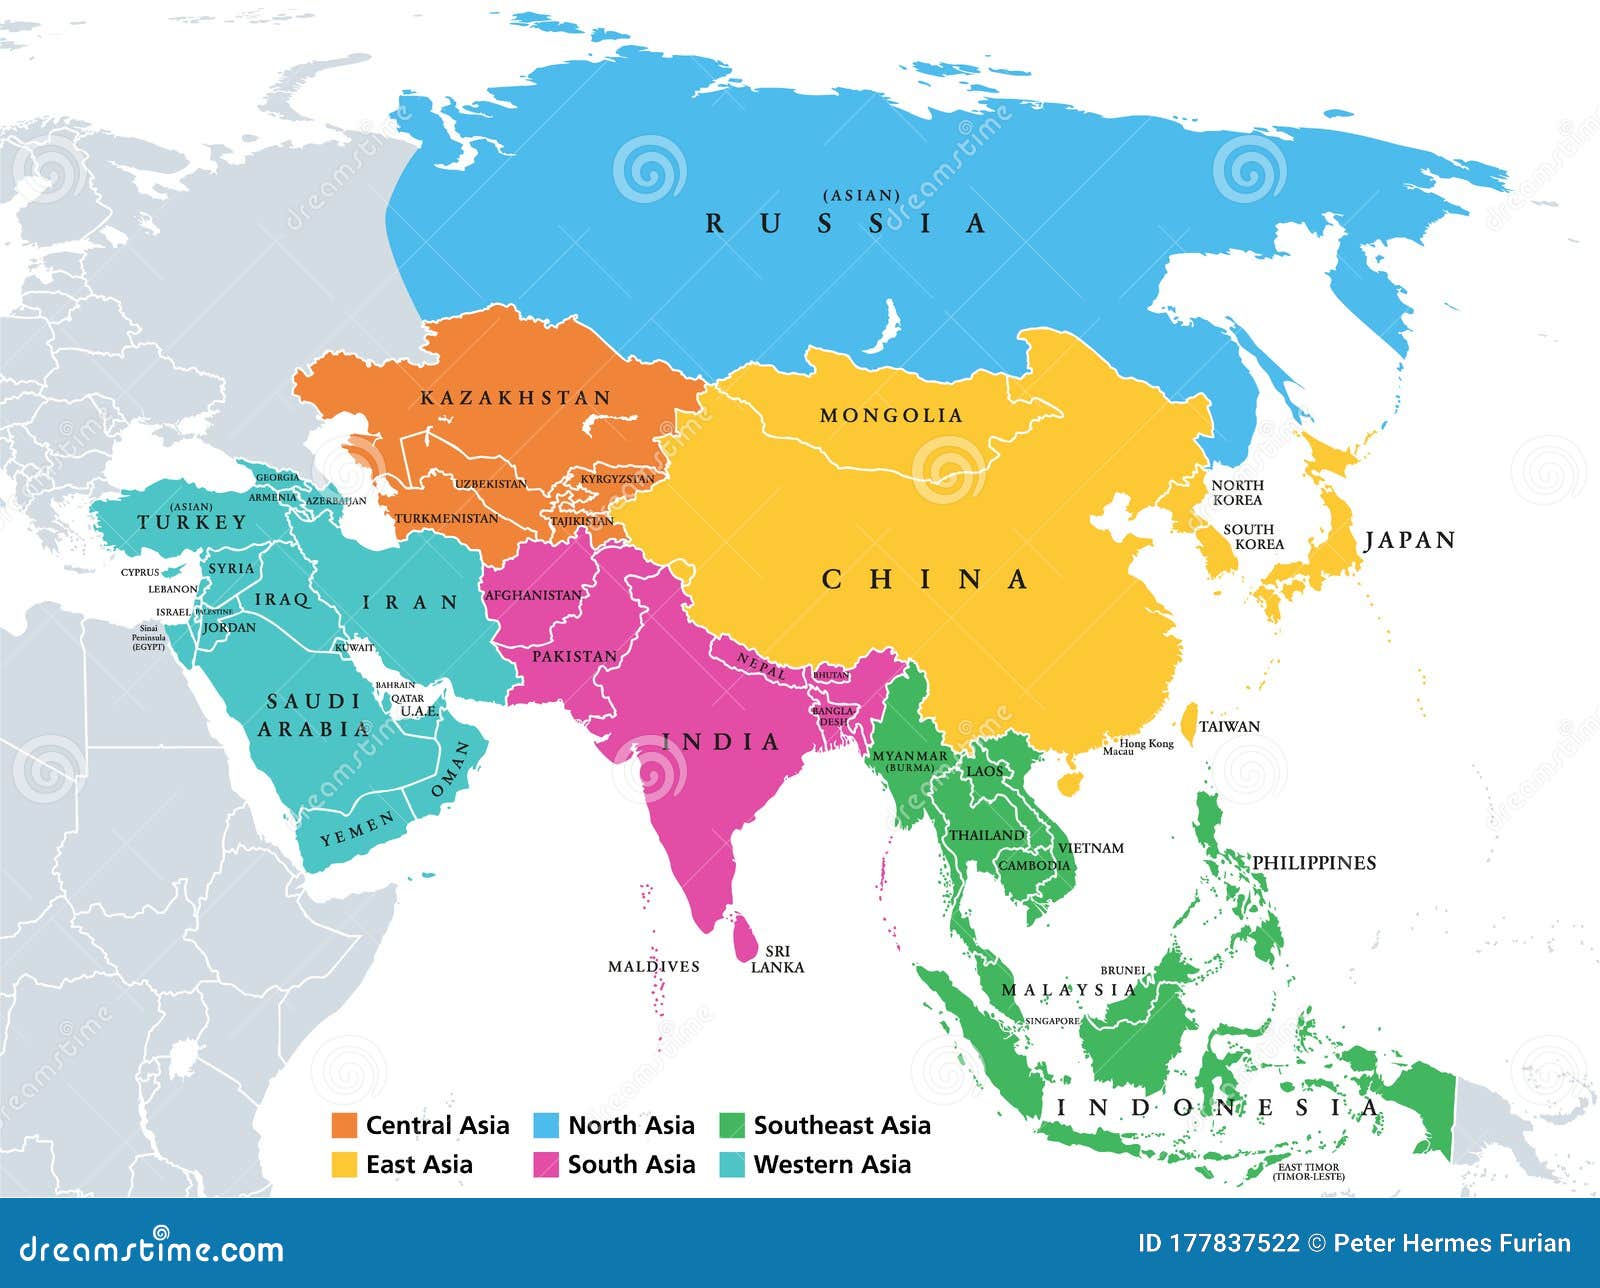 Asia Countries And Regions Map 